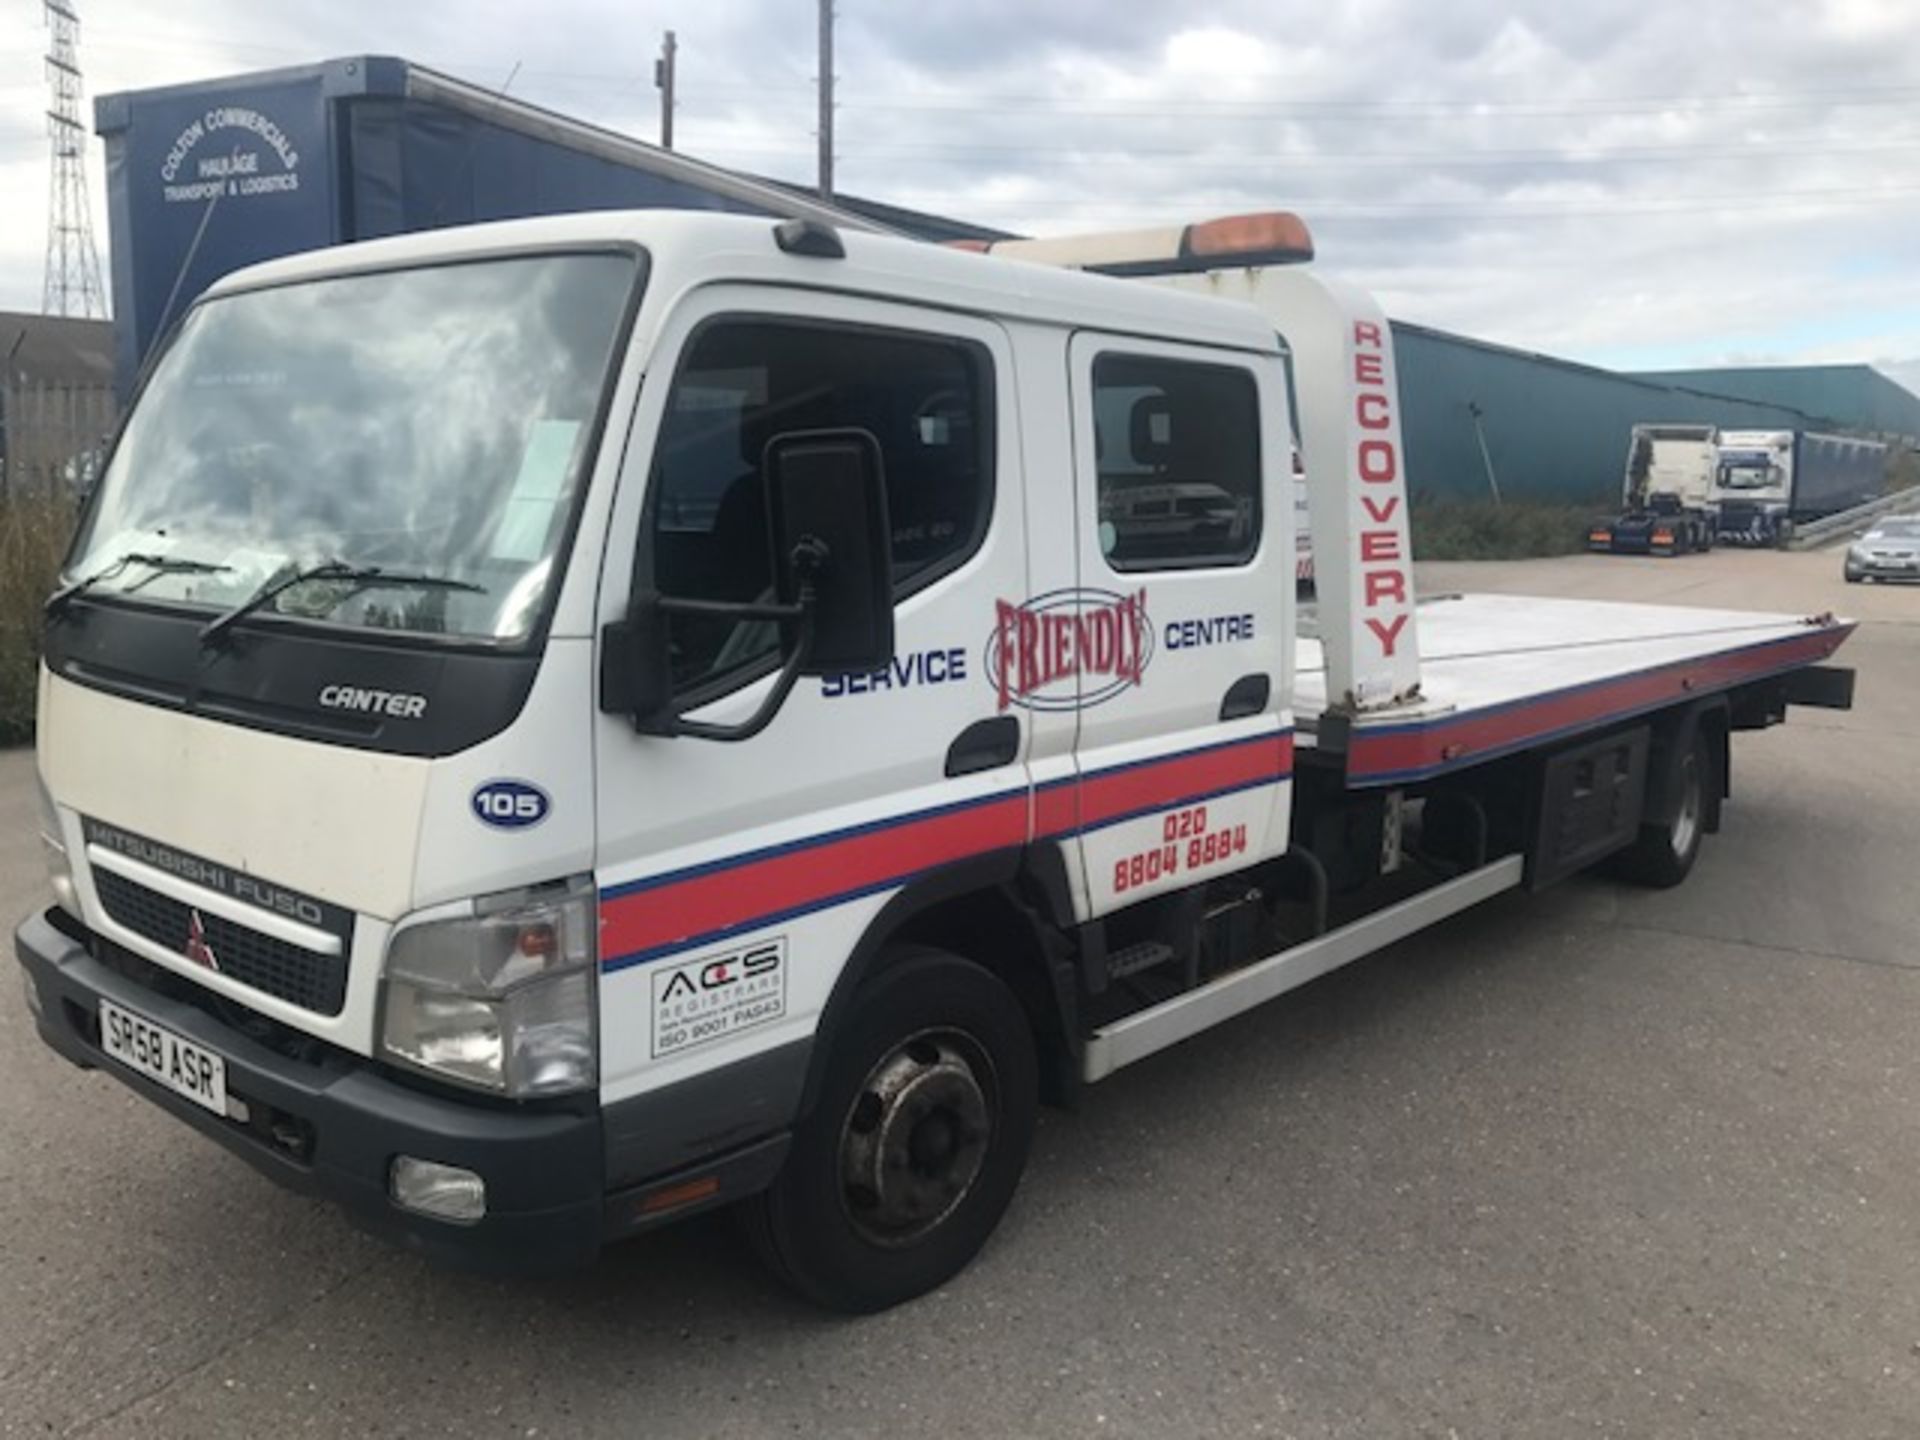 2008 Mitsubishi Fuso 7.5T crew cab tilt and slide breakdown vehicle complete with winch - Image 2 of 14